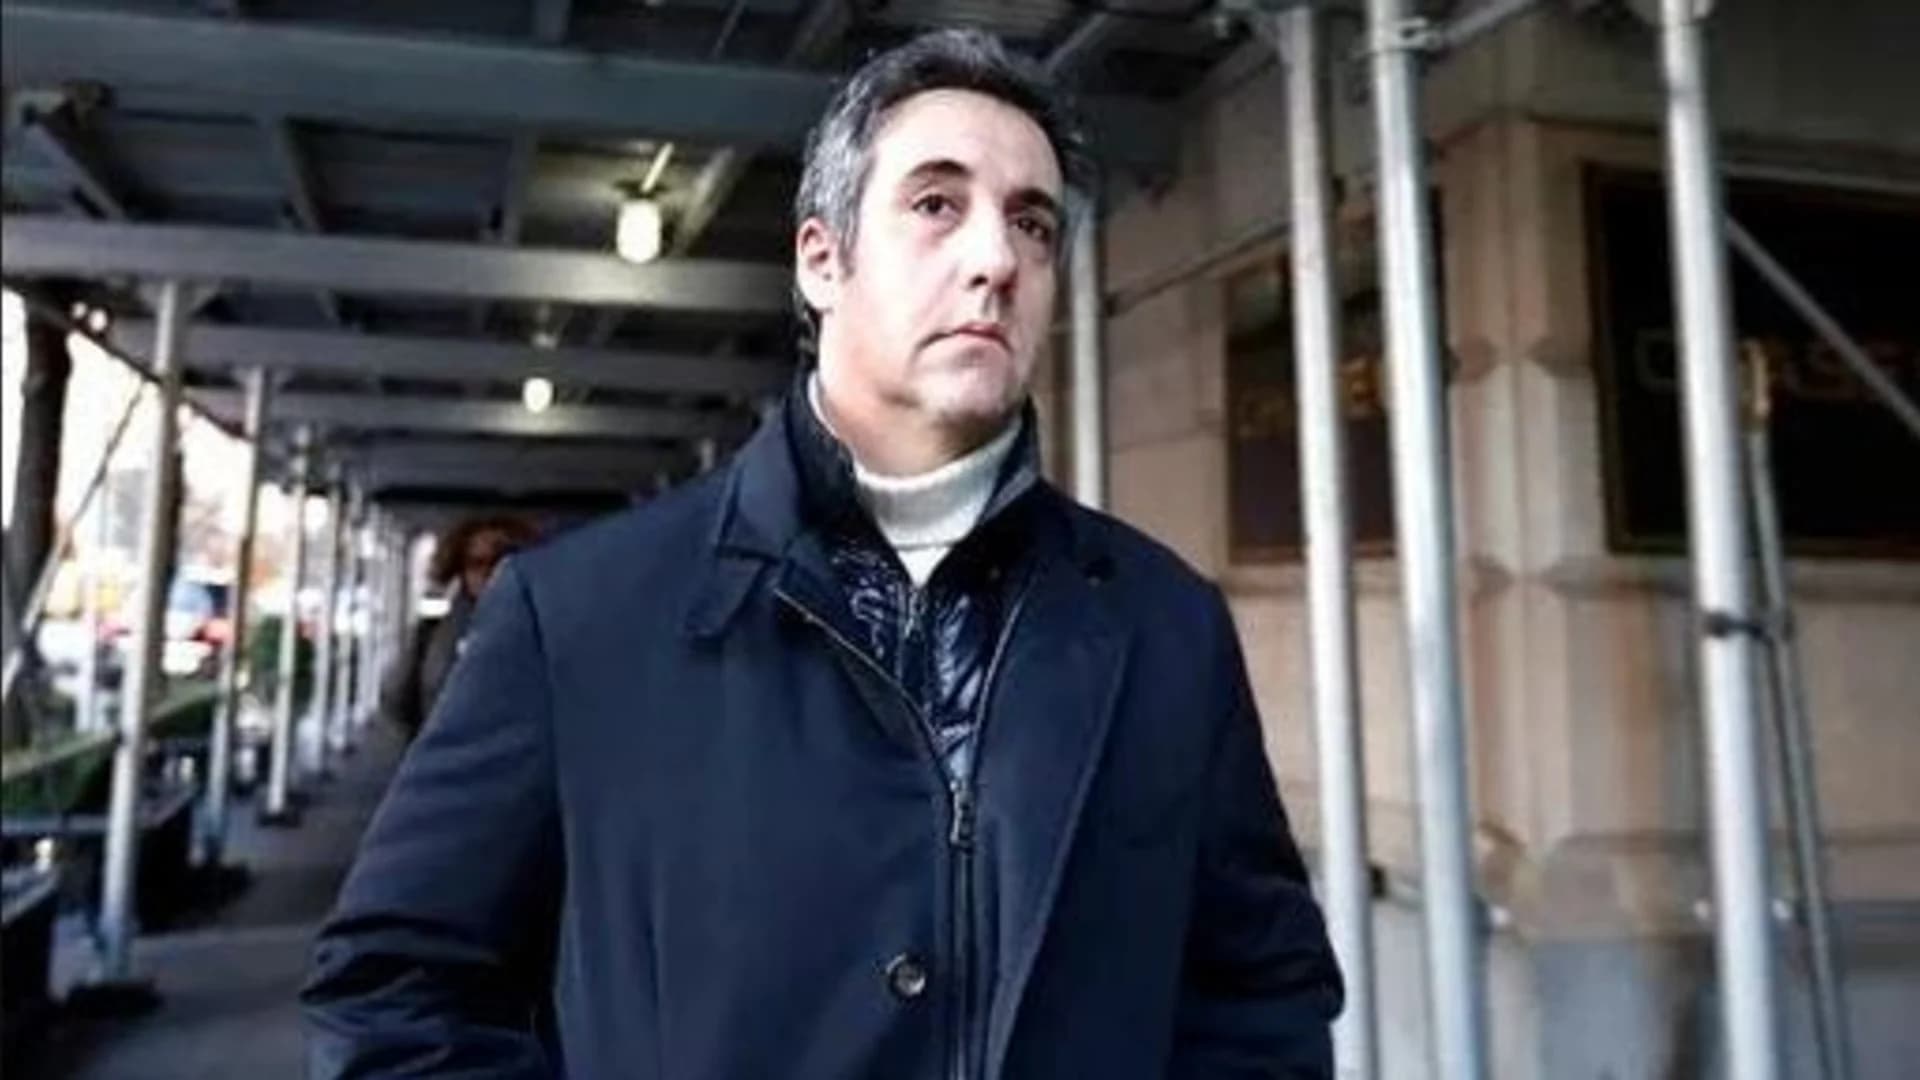 Congress to probe report Trump told lawyer Cohen to lie